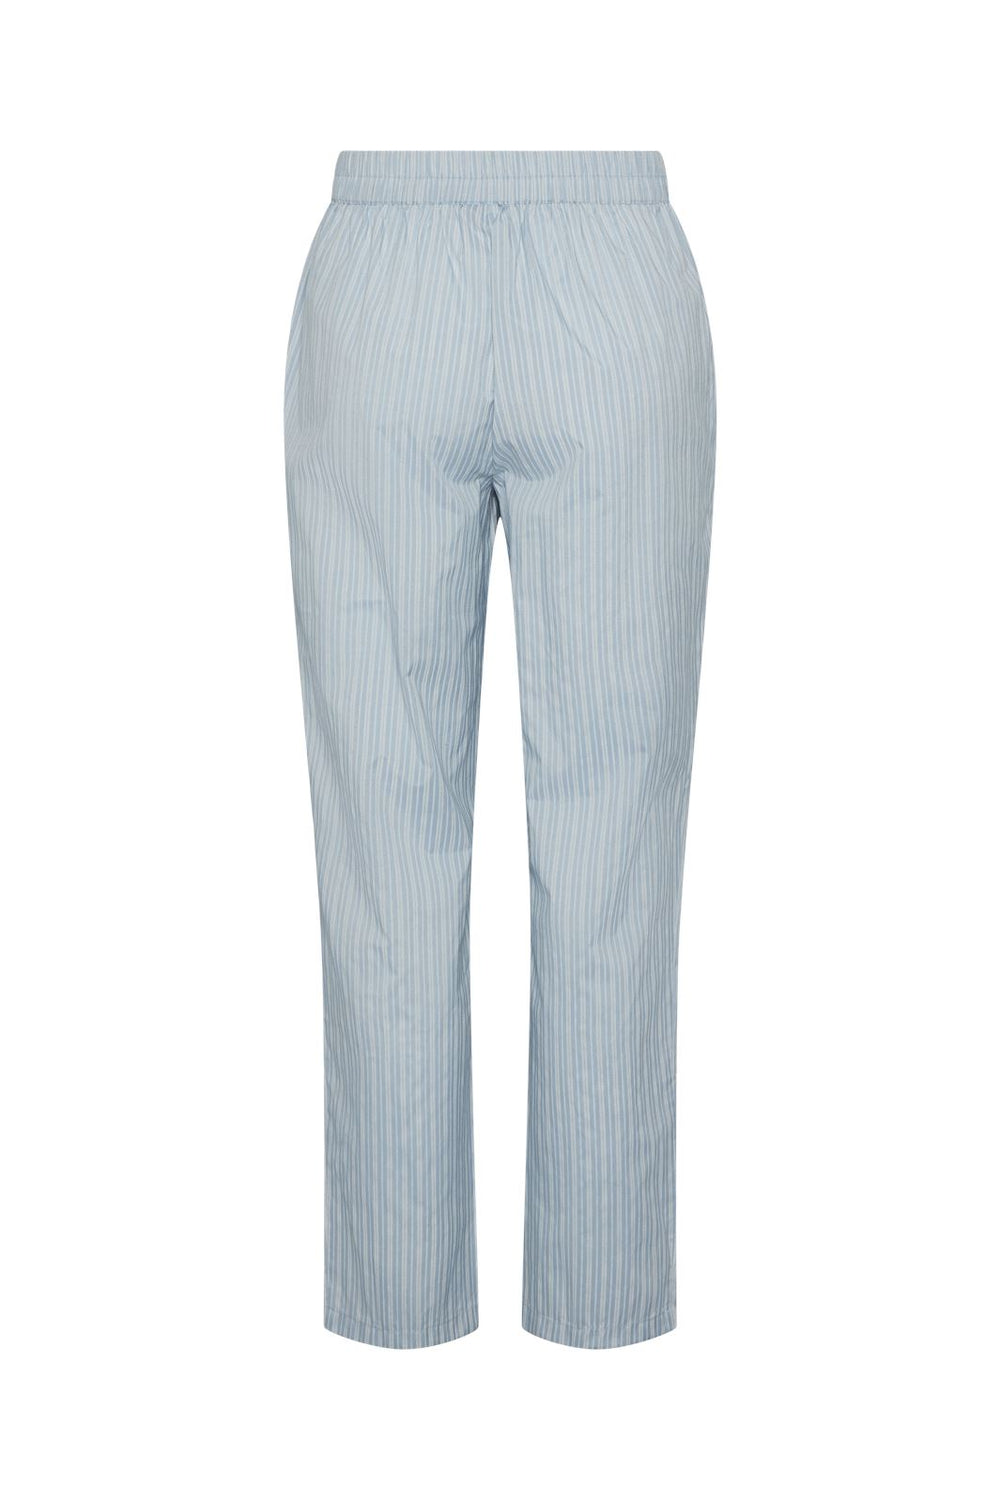 Pieces - Pcassra Ankle Pant - 4598987 Blue Bell Bright White